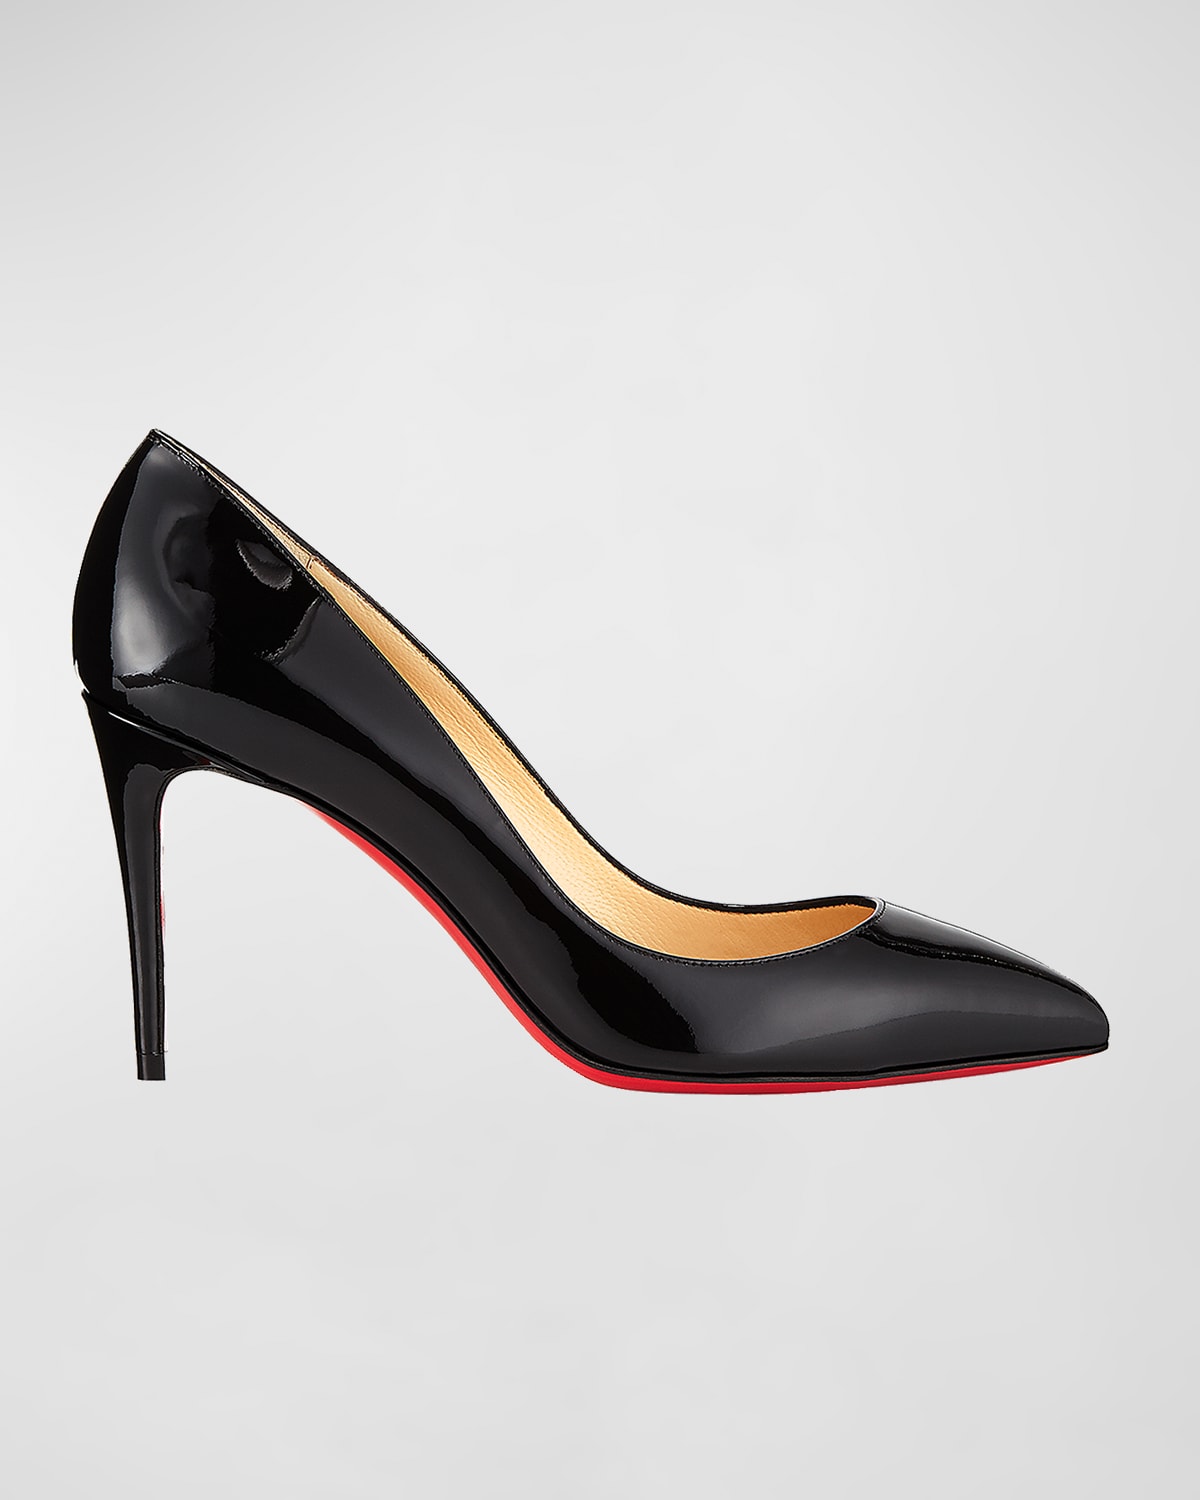 CHRISTIAN LOUBOUTIN PIGALLE FOLLIES 85MM PATENT RED SOLE PUMPS,PROD210820052